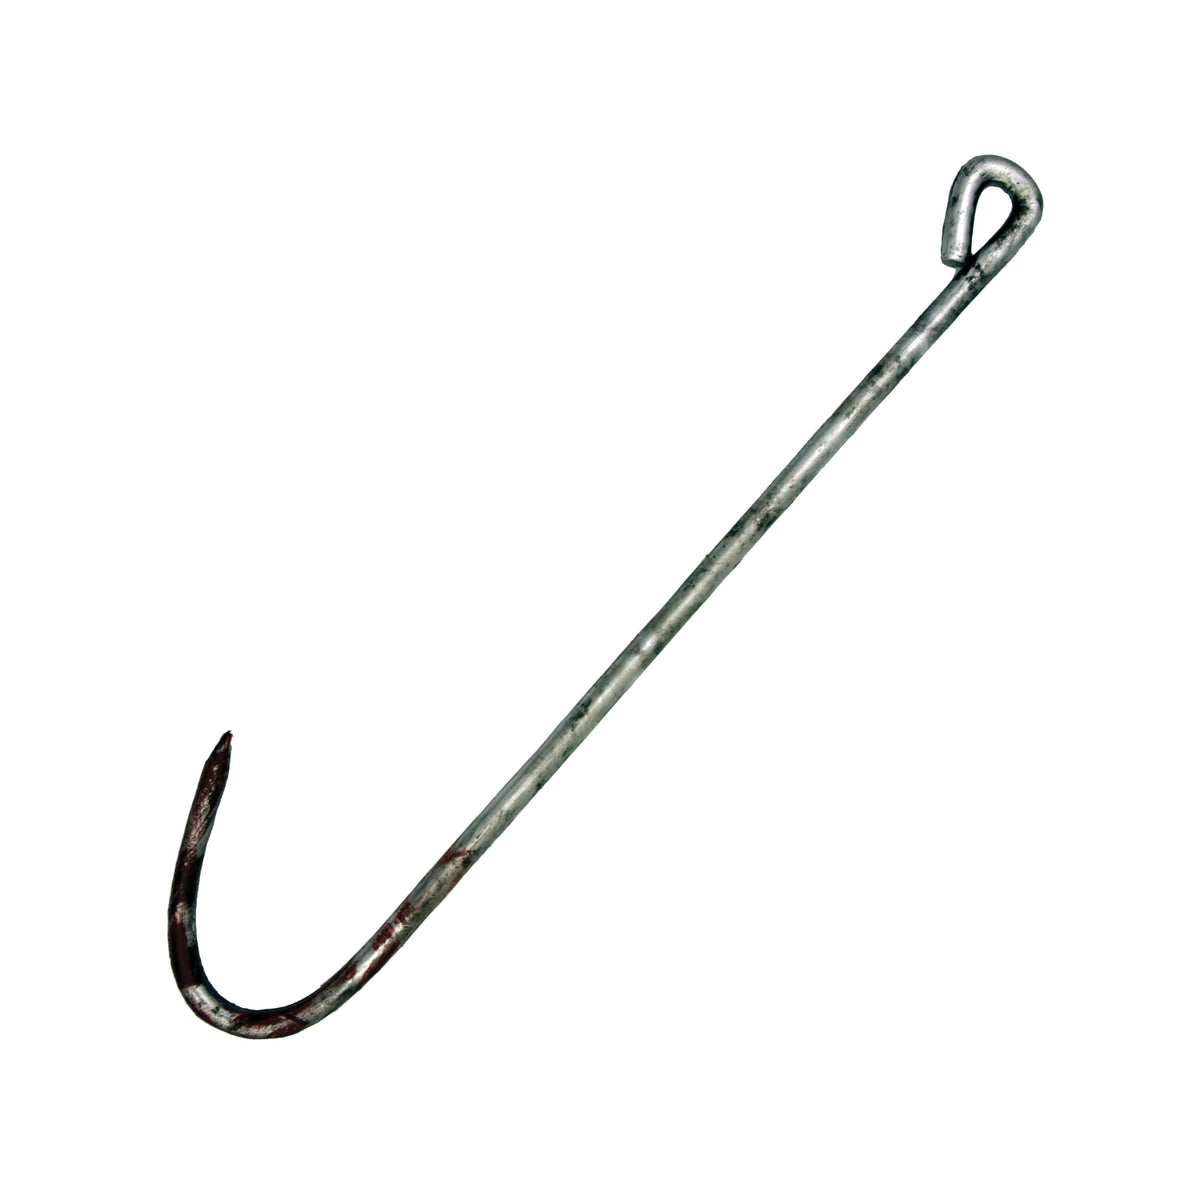 The Texas Chainsaw Massacre - Leatherface Meat Hook Prop